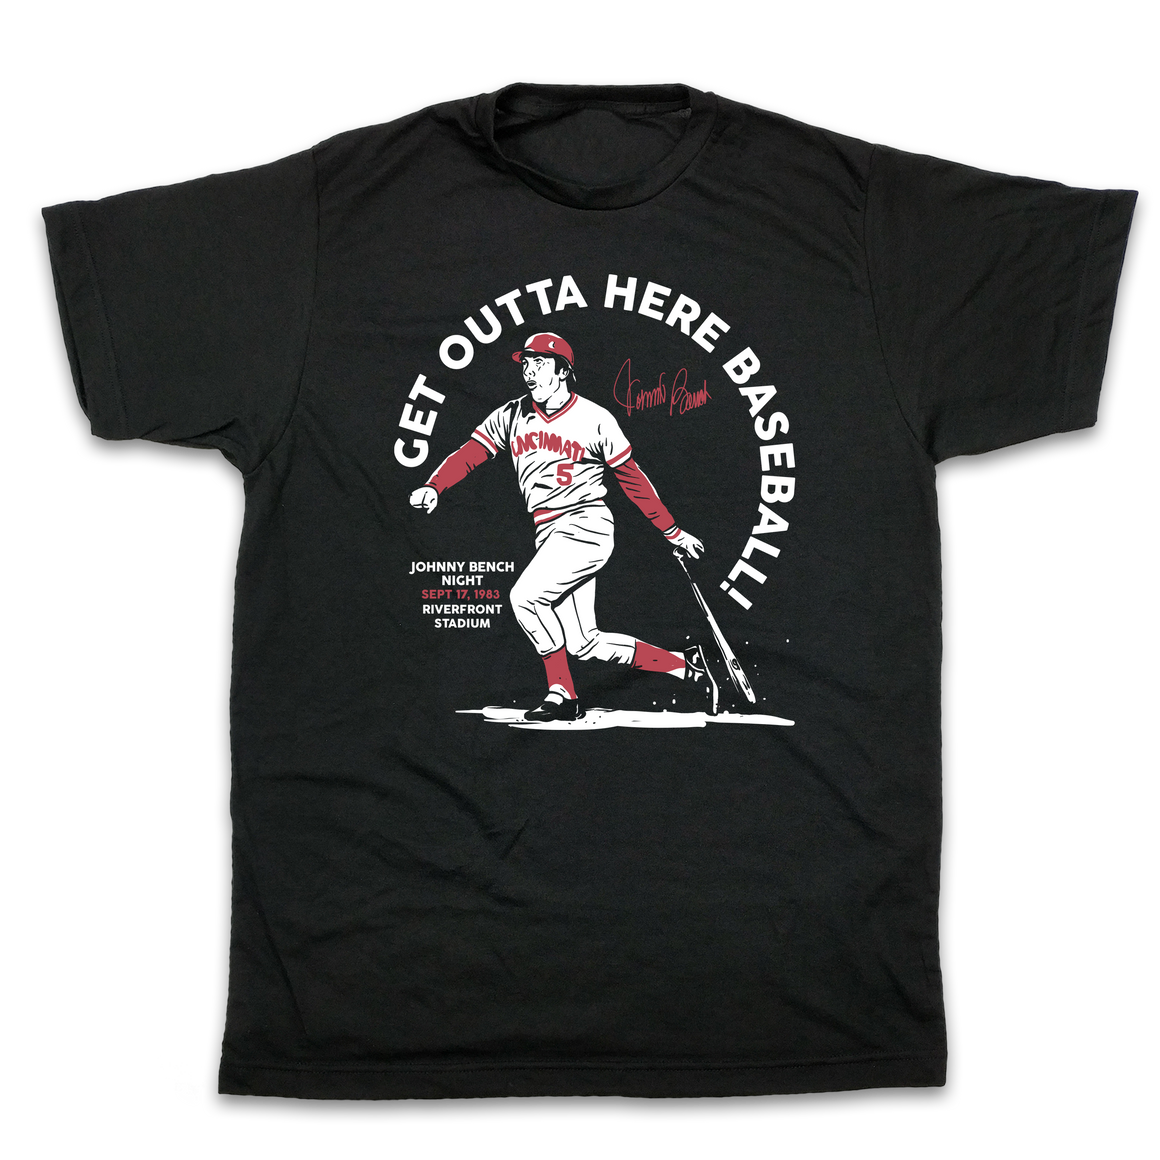 Get Outta Here Baseball Johnny Bench - Cincy Shirts